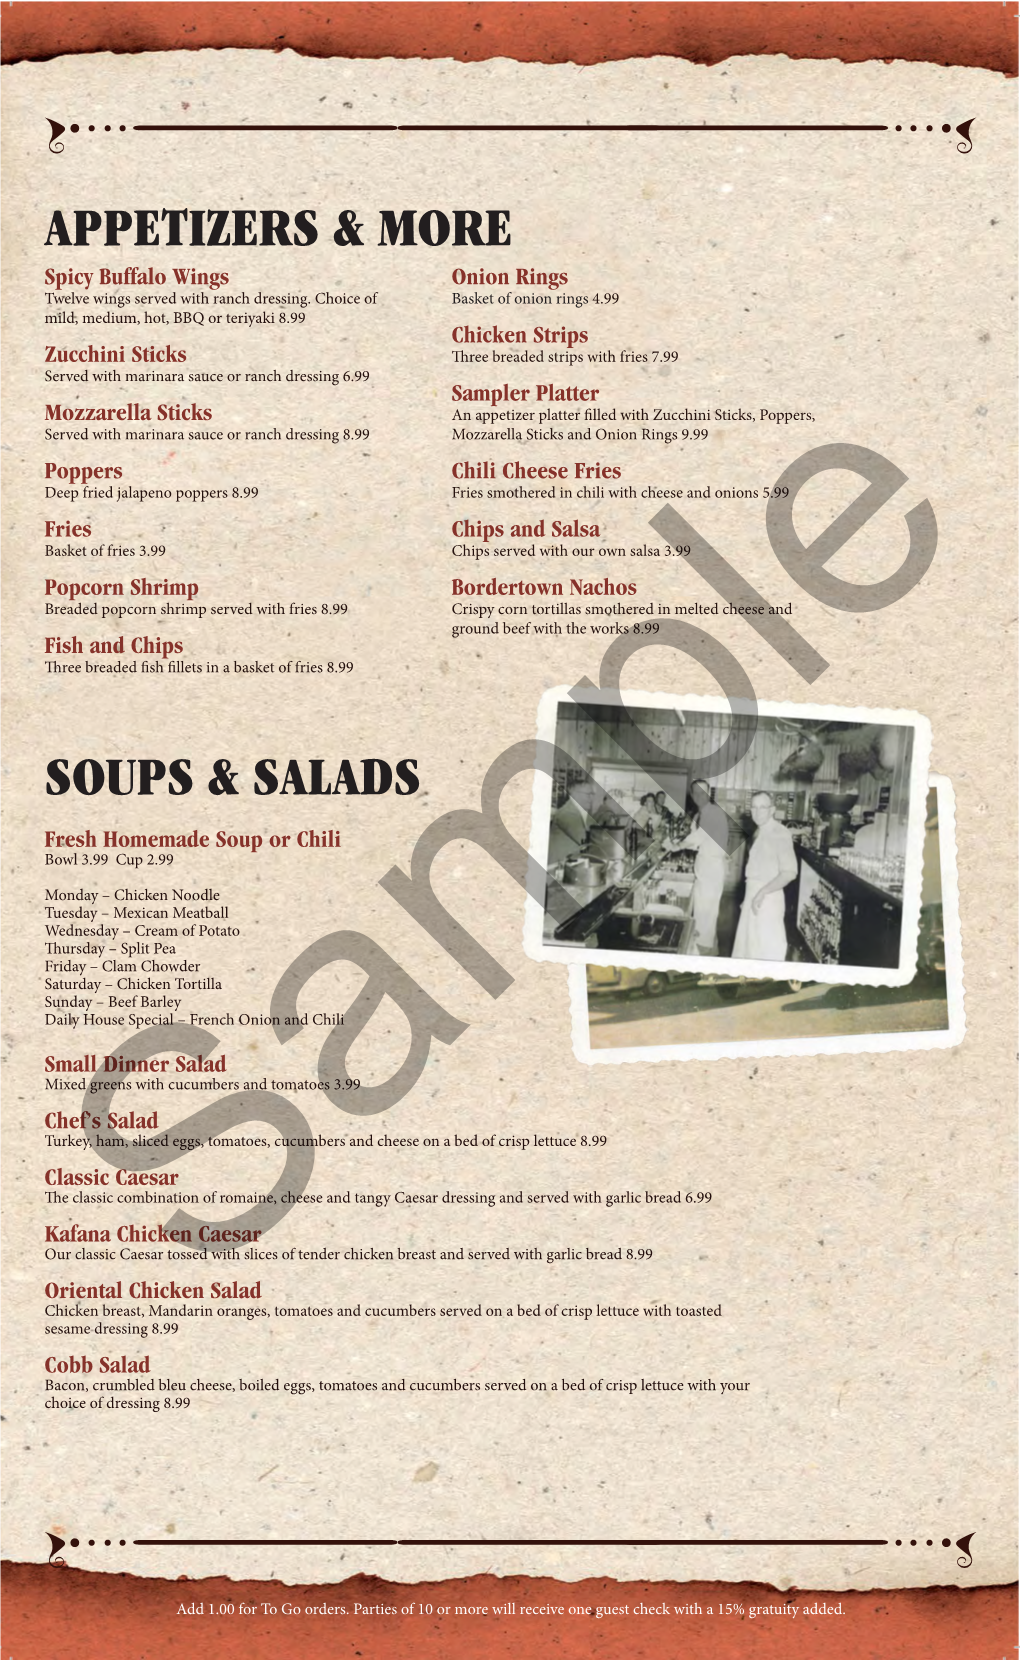 Appetizers & More Soups & Salads